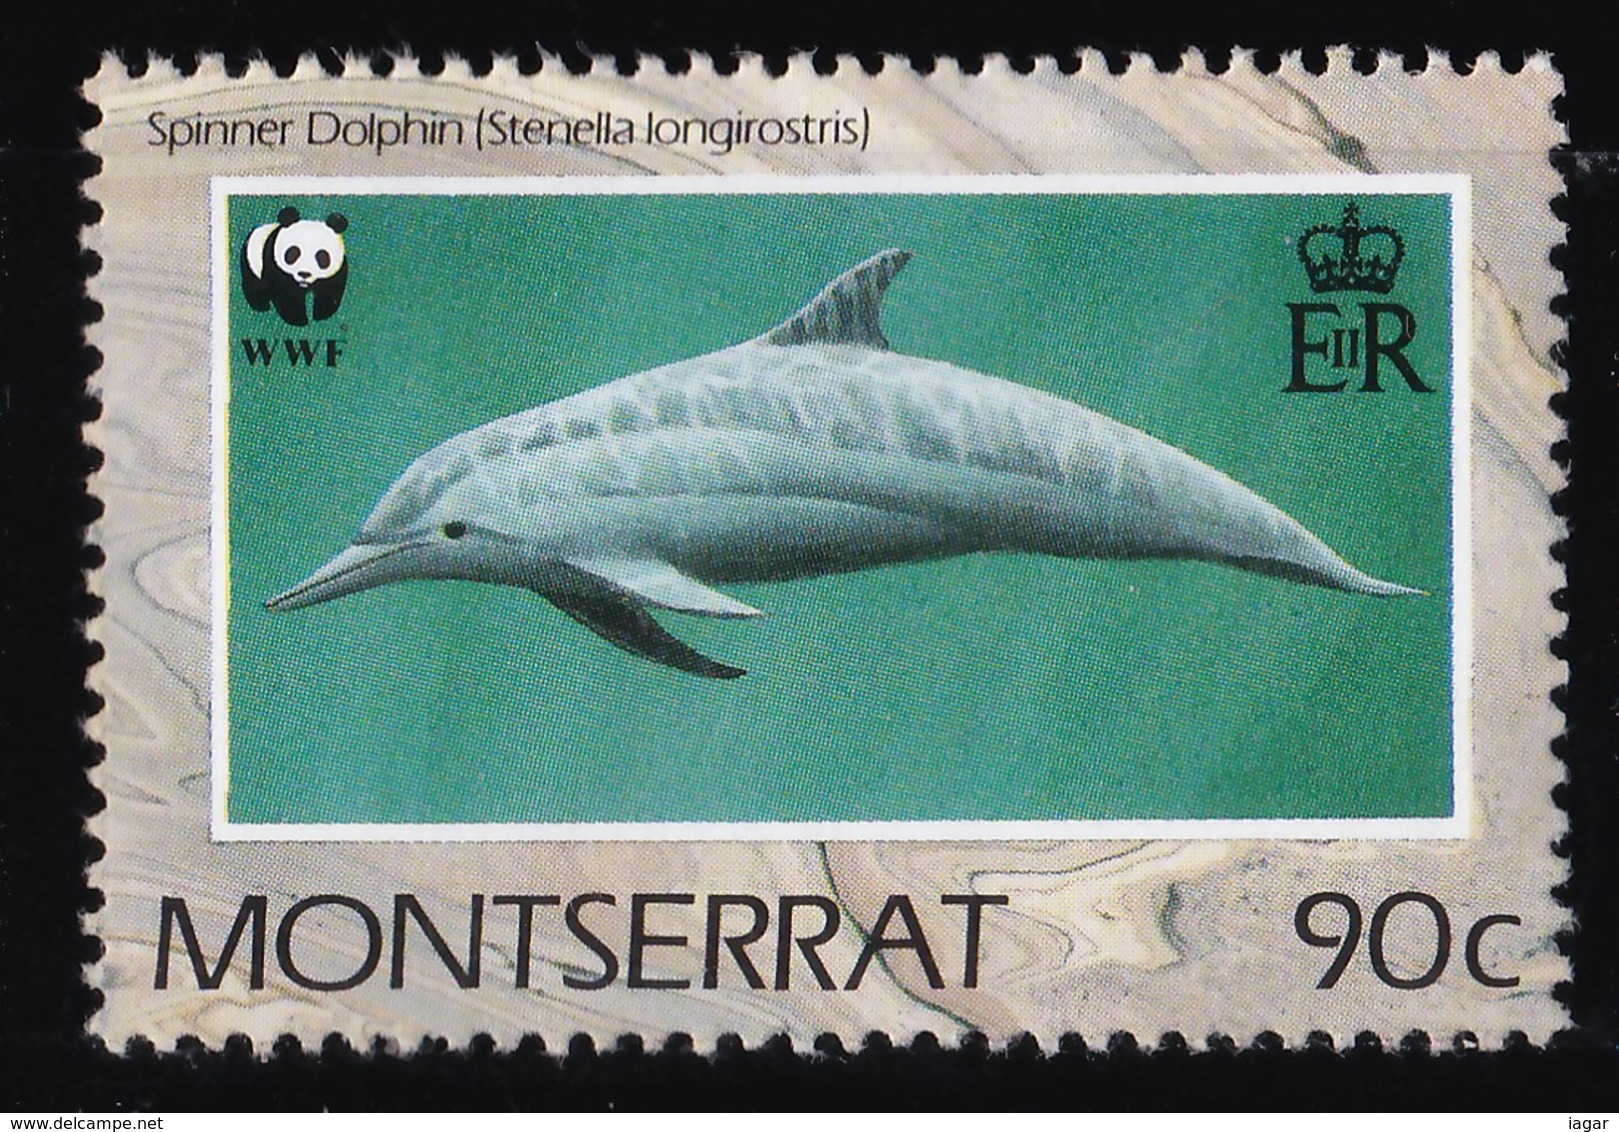 THEMATIC FISH:  DOLPHINS - MONTSERRAT - Dolphins